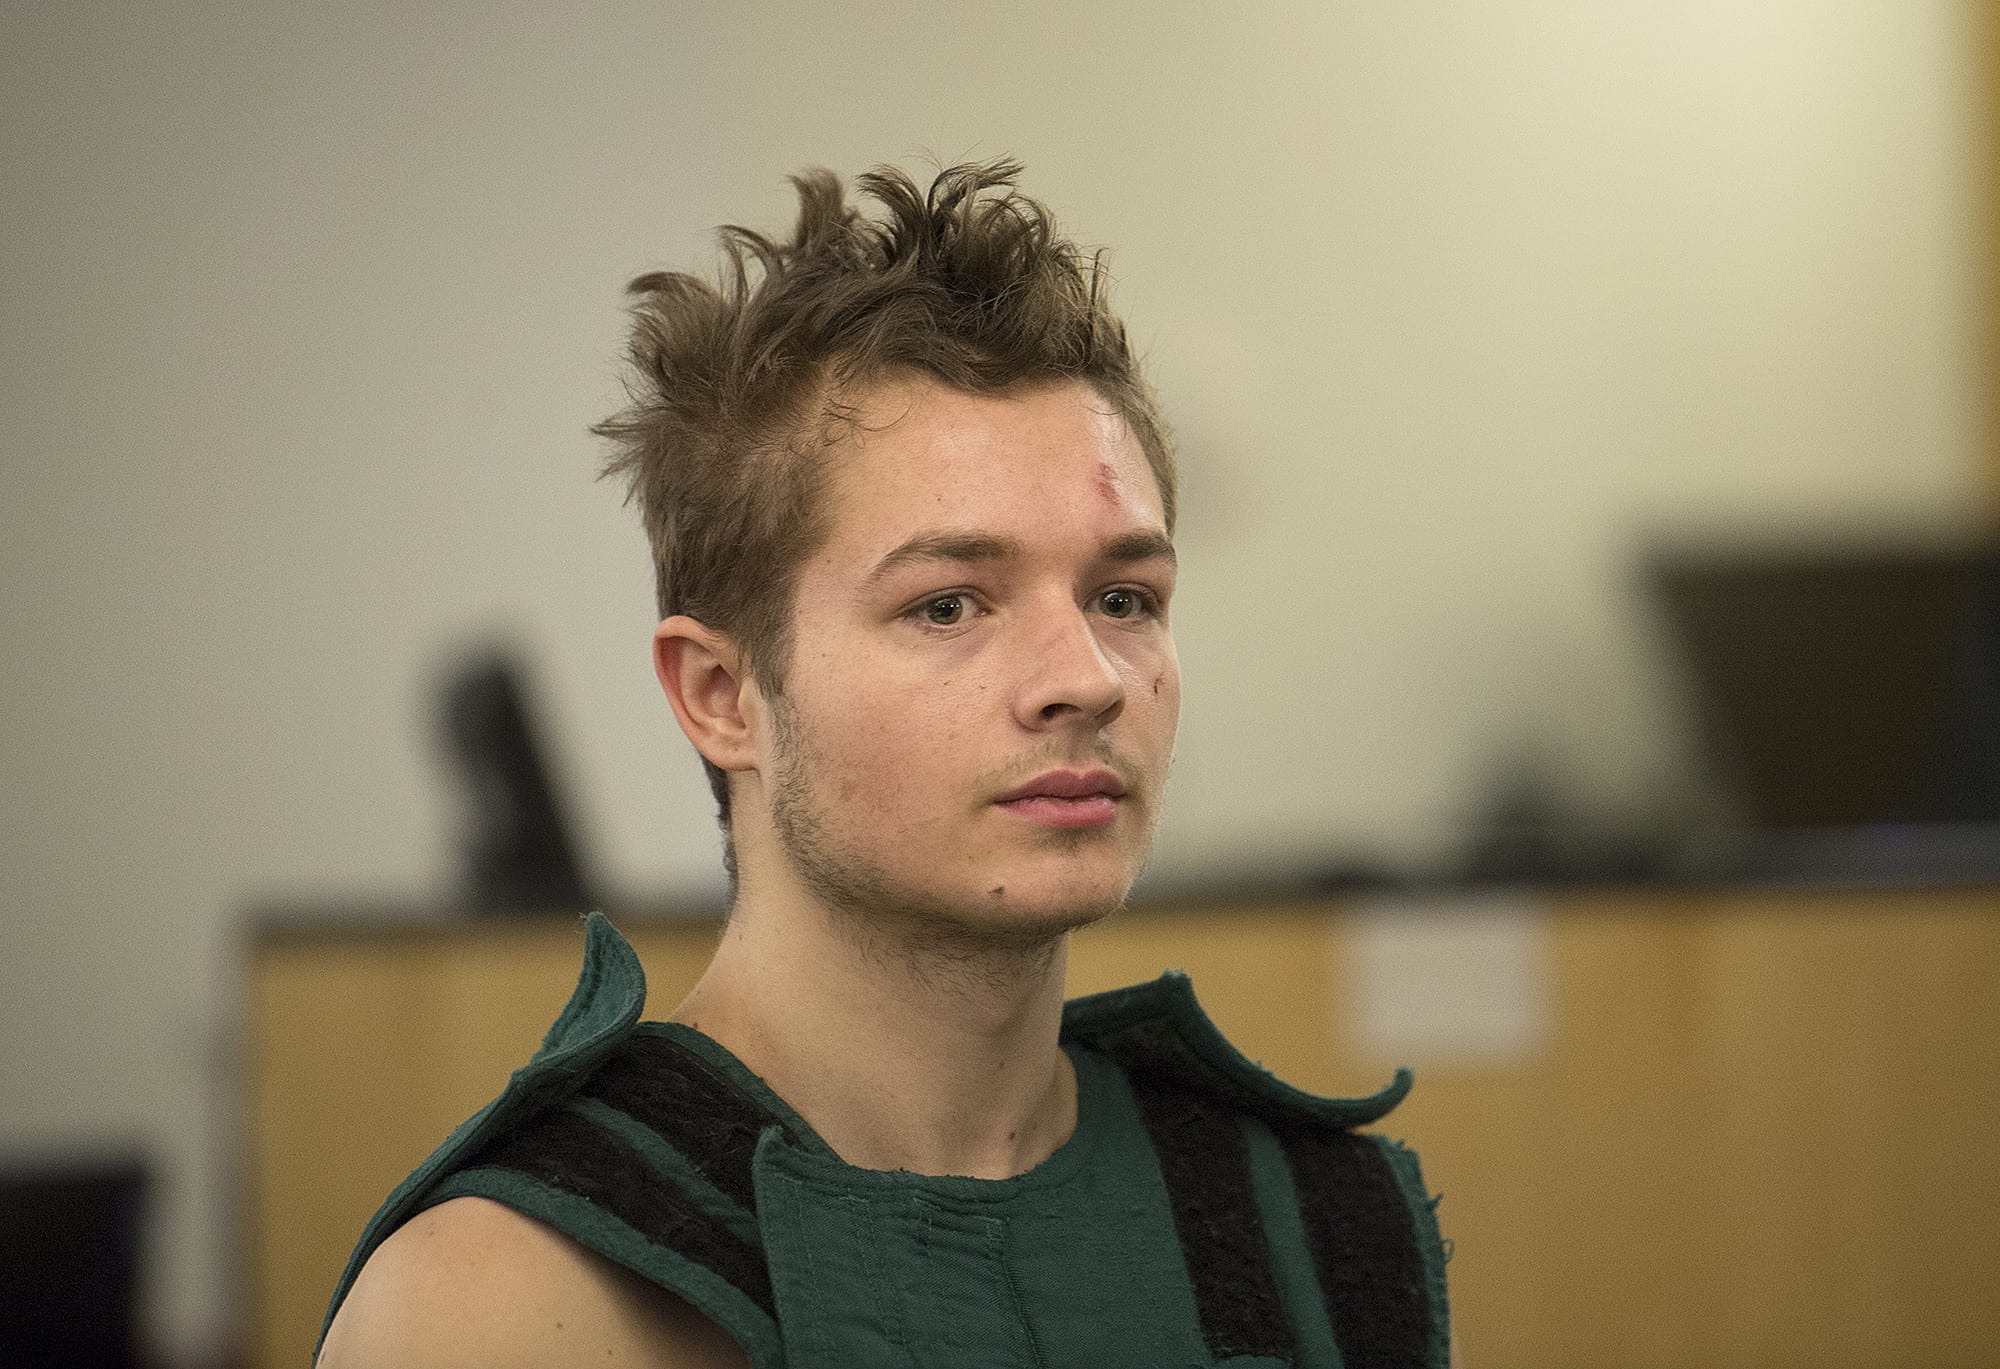 Colin Dixon makes a first appearance in Clark County Superior Court on Friday morning, Jan. 19, 2018. (Amanda Cowan/The Columbian) Colin Dixon, 21, of Battle Ground appeared in Clark County District Court on charges stemming from an alleged knife attack on his family.